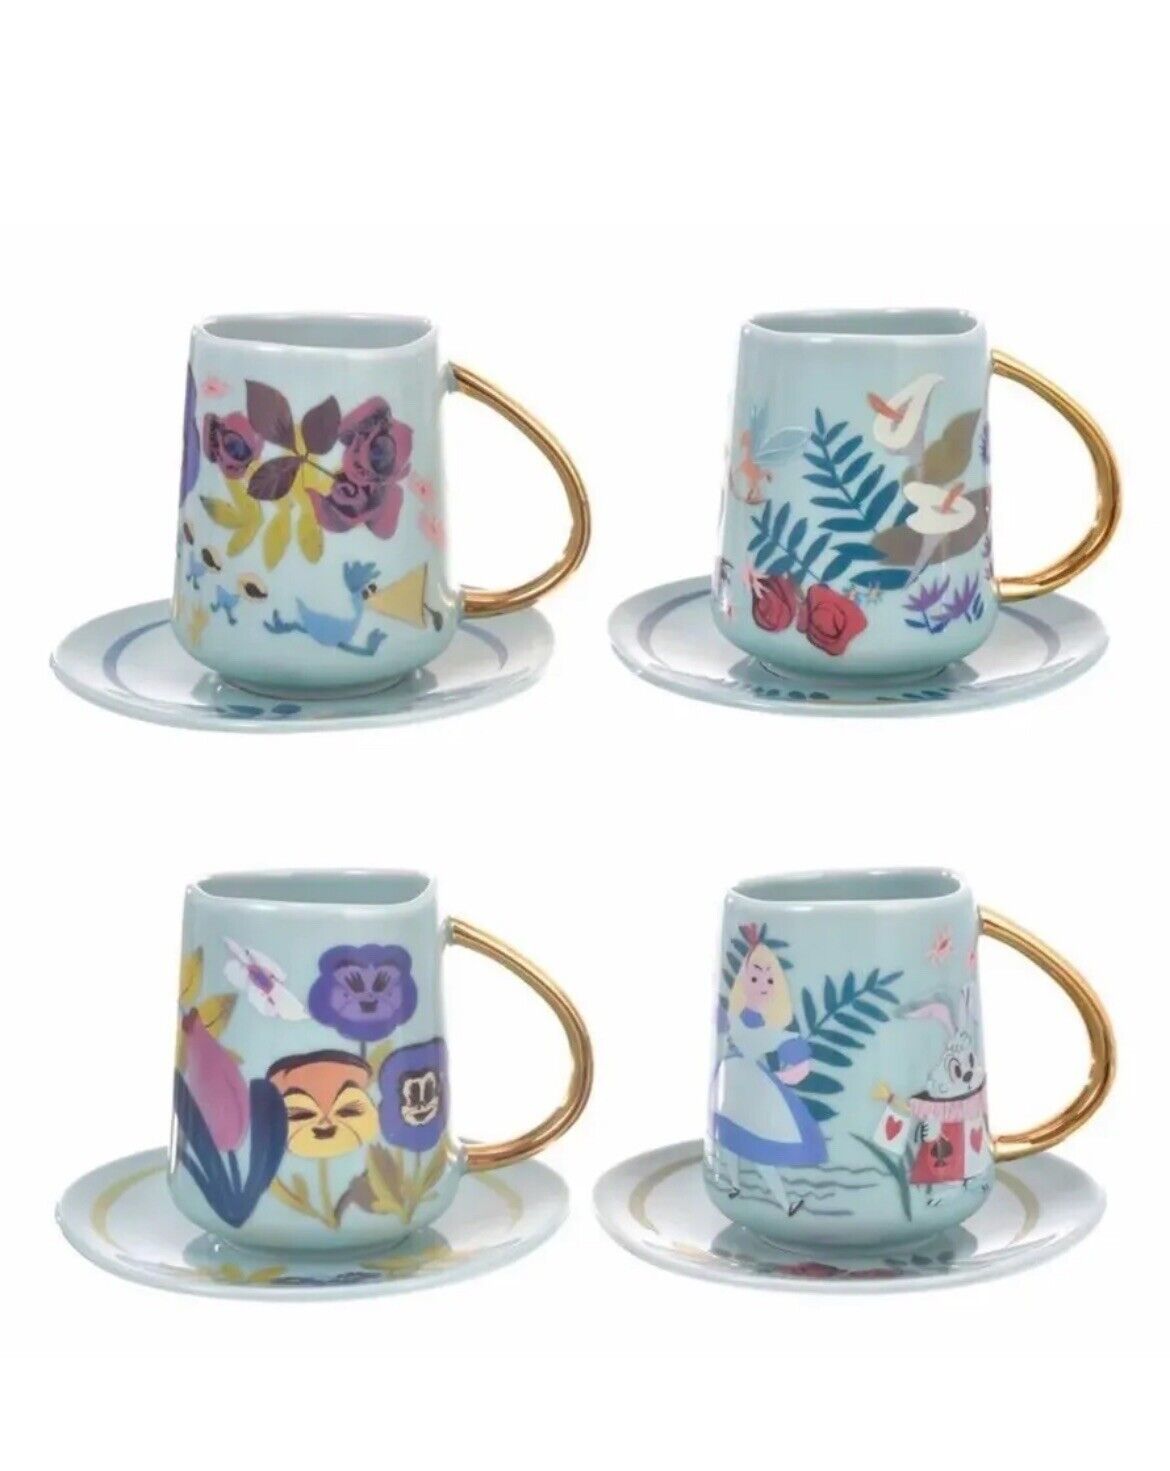 Disney Alice in Wonderland  Mary Blair cup and saucer set mug cups